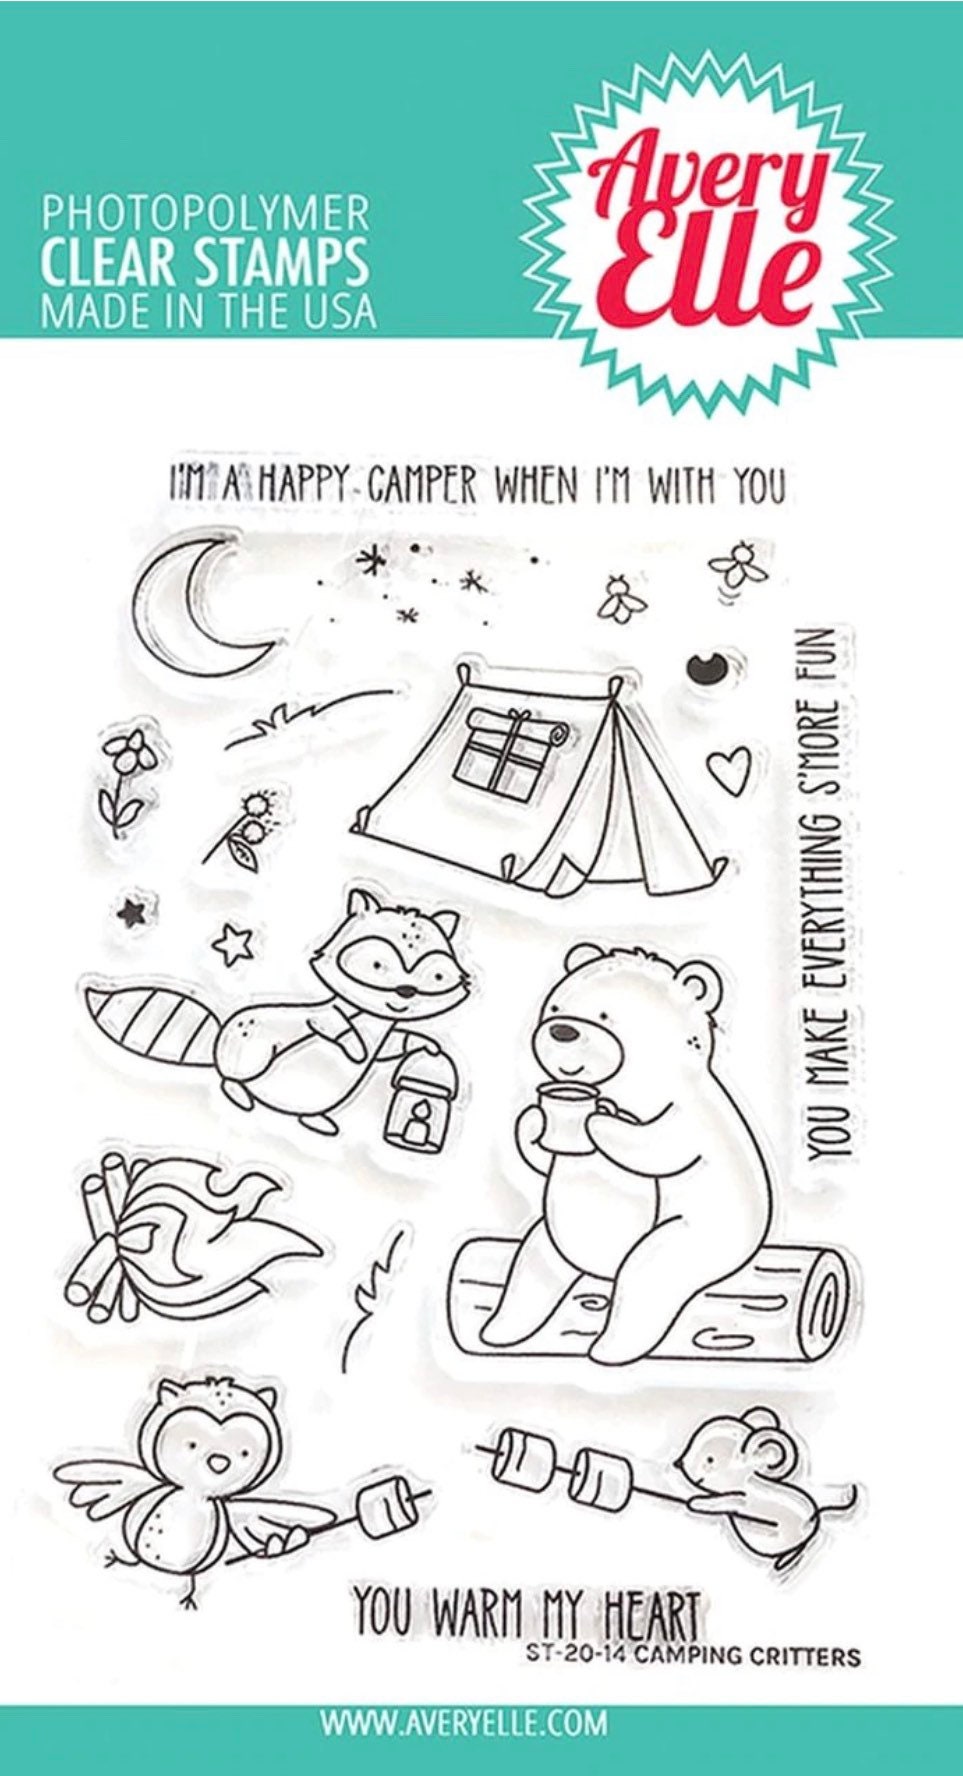 Avery Elle Clear Photopolymer Rubber Stamp Set - Camping Critters